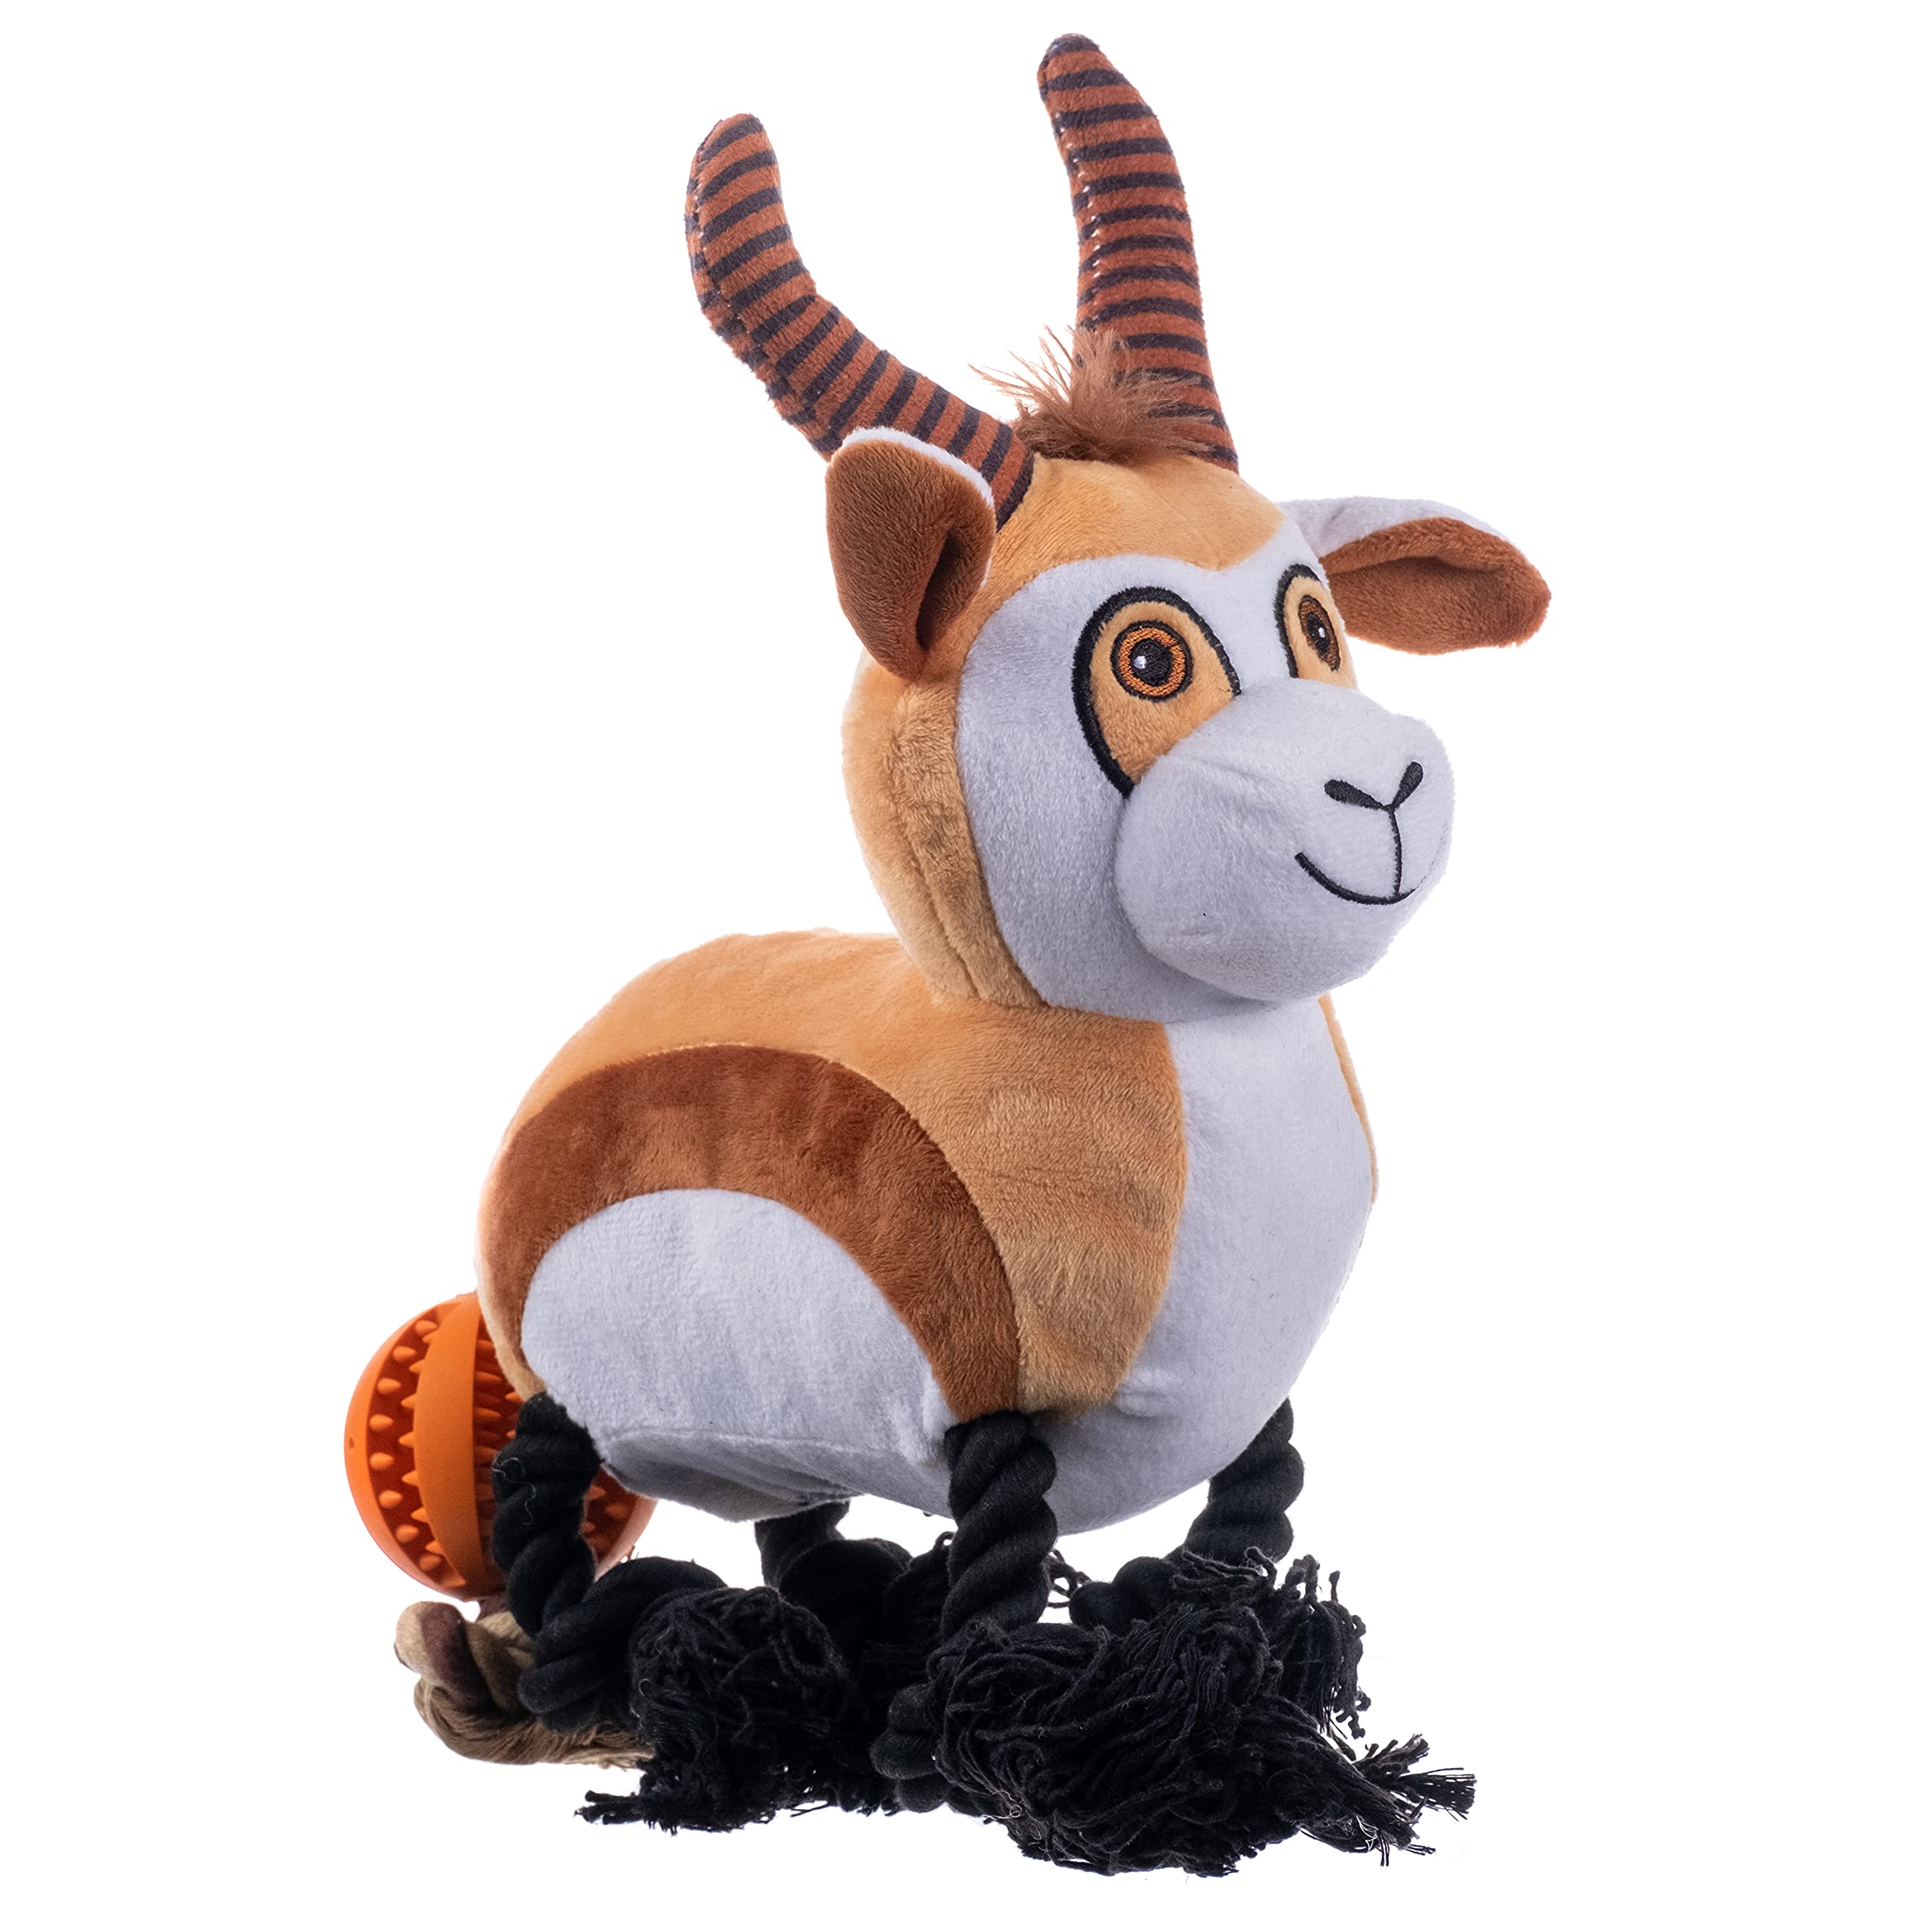 Pronk! Pets, A Variety of Soft Plush Squeaky Rope Dog Toys, Great for Medium and Large-Sized Breeds